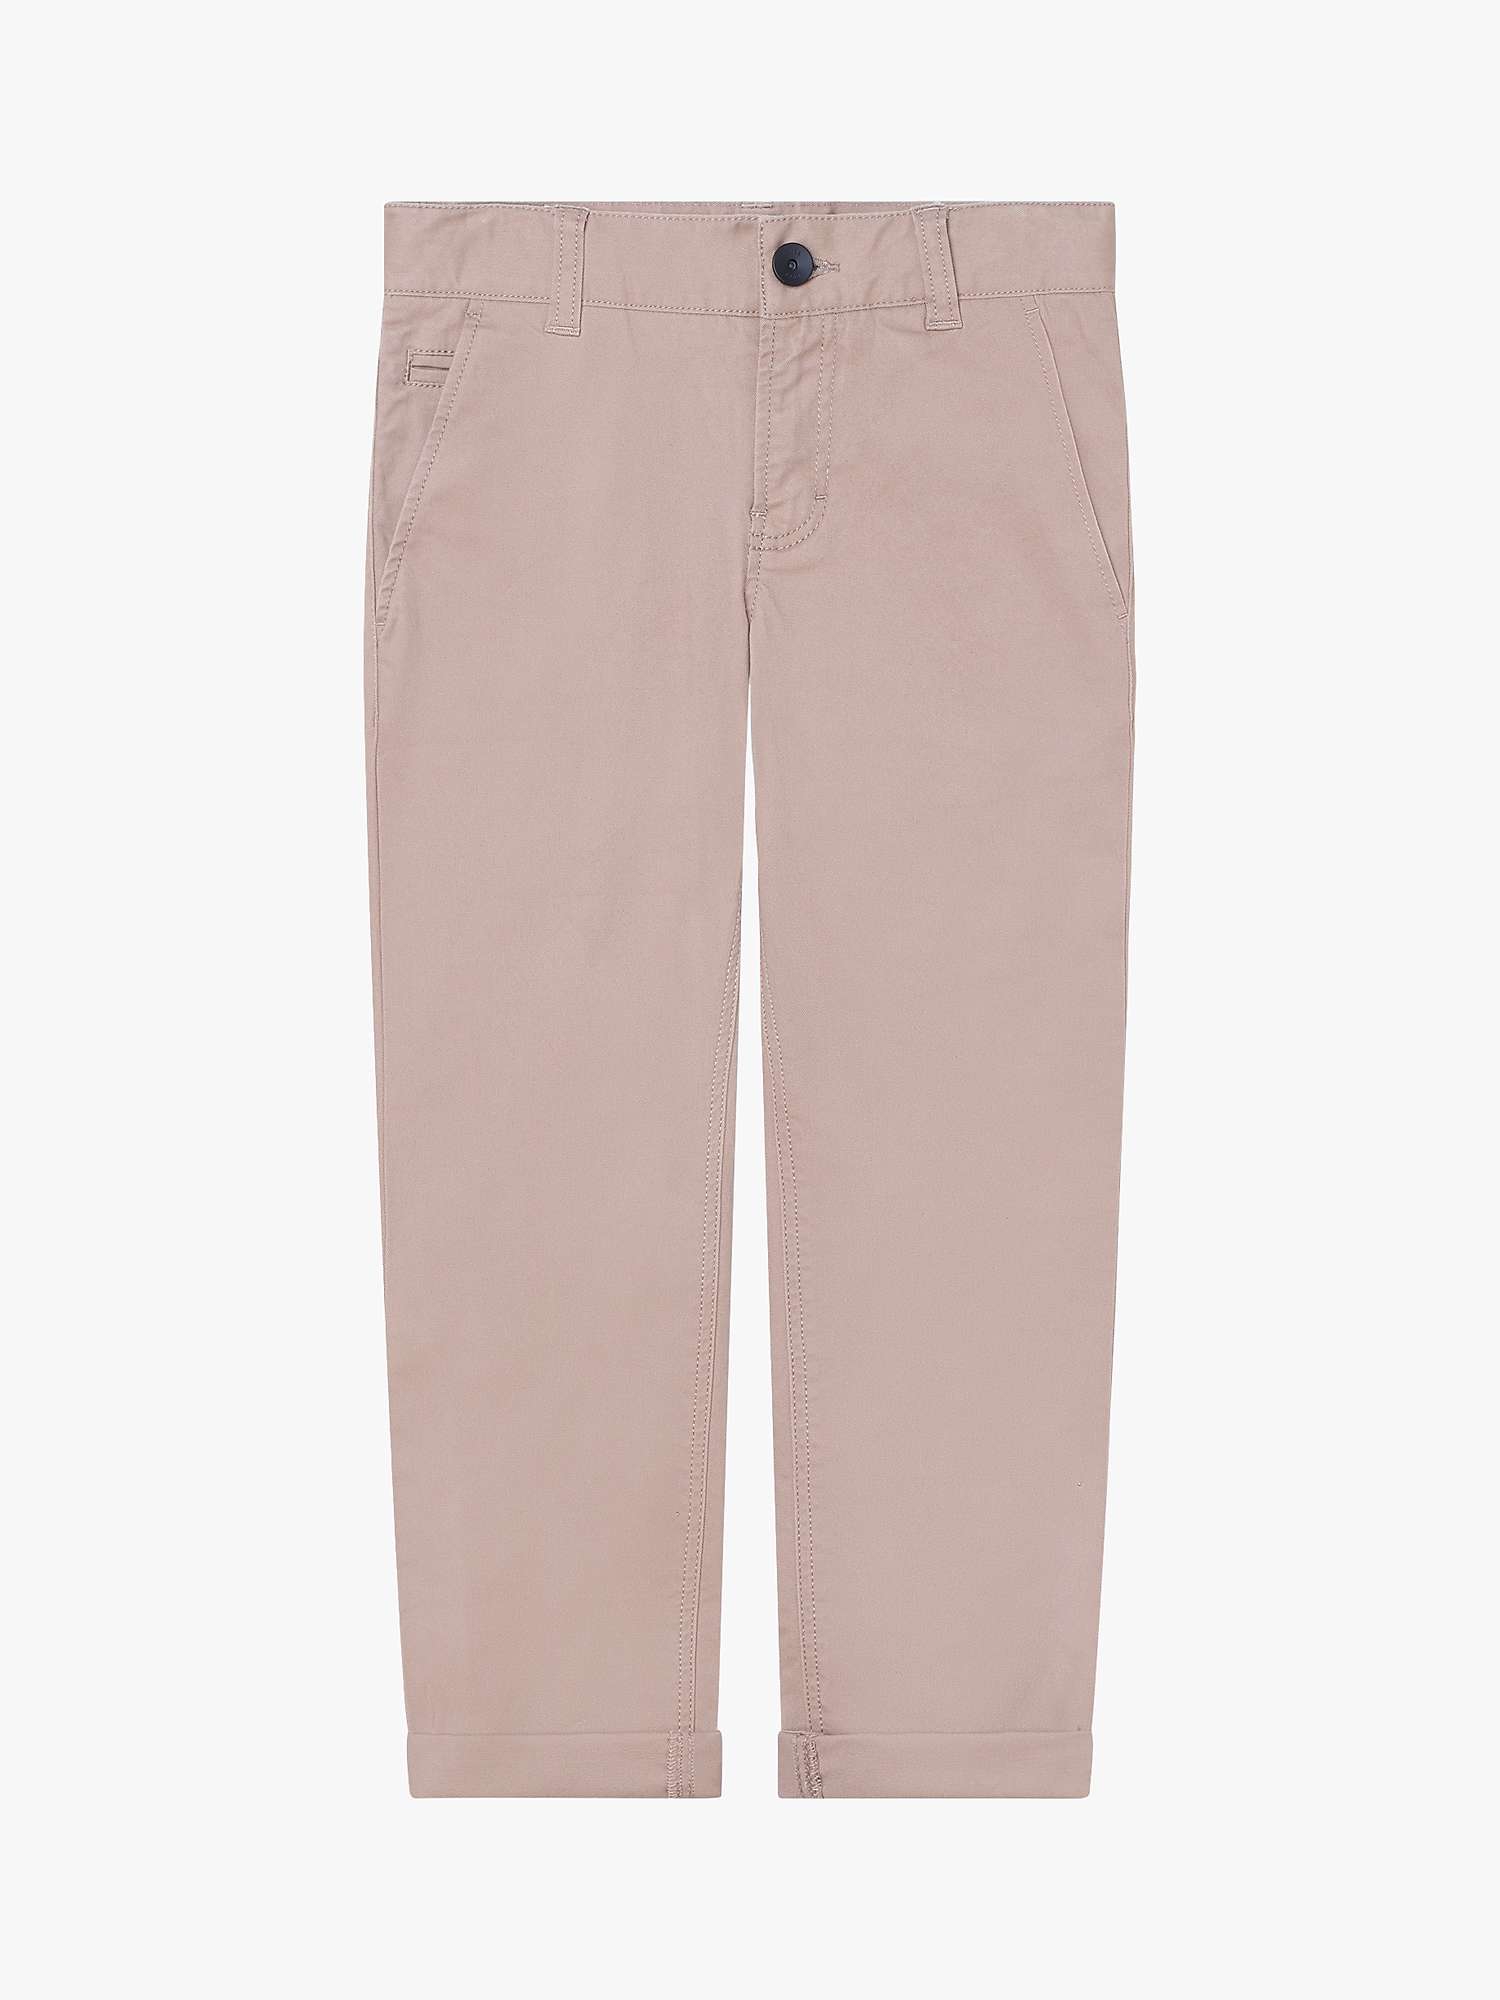 Buy BOSS Kids' Slim Fit Twill Trousers Online at johnlewis.com